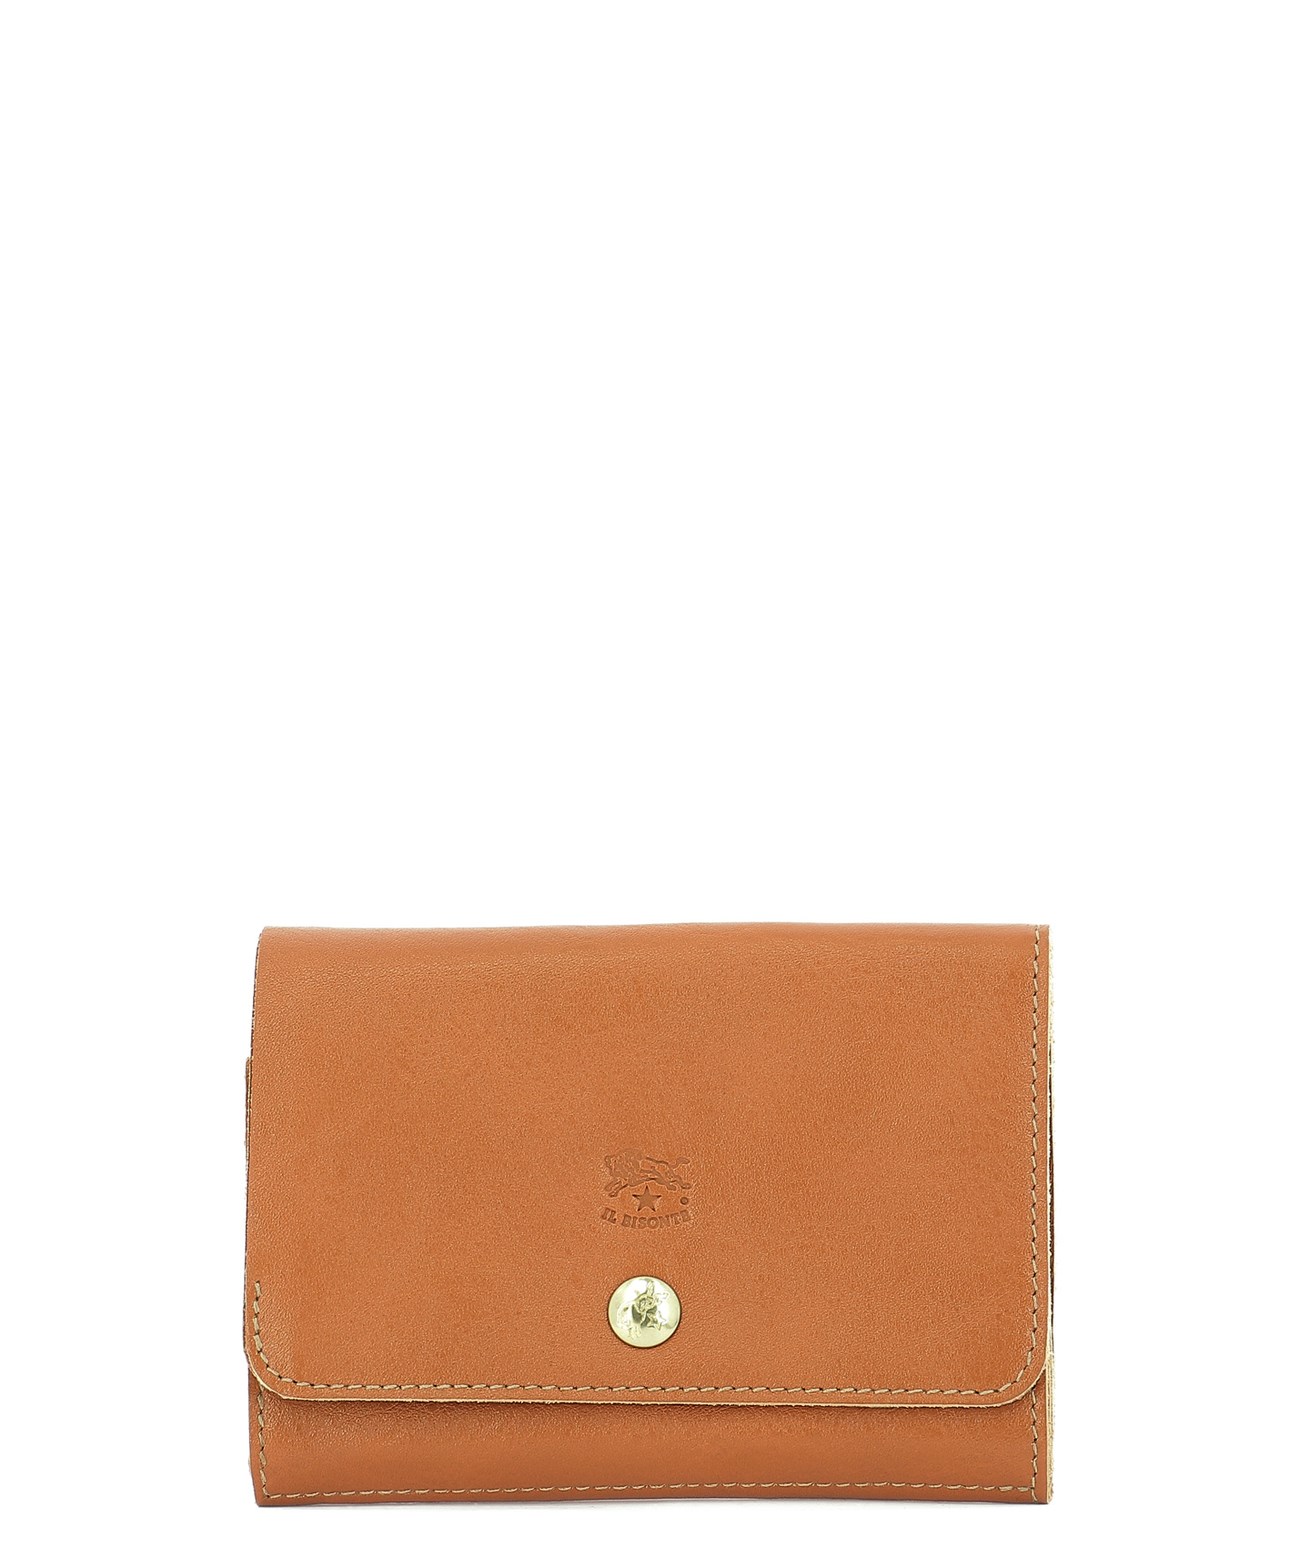 【Il Bisonte】Leather wallet with button